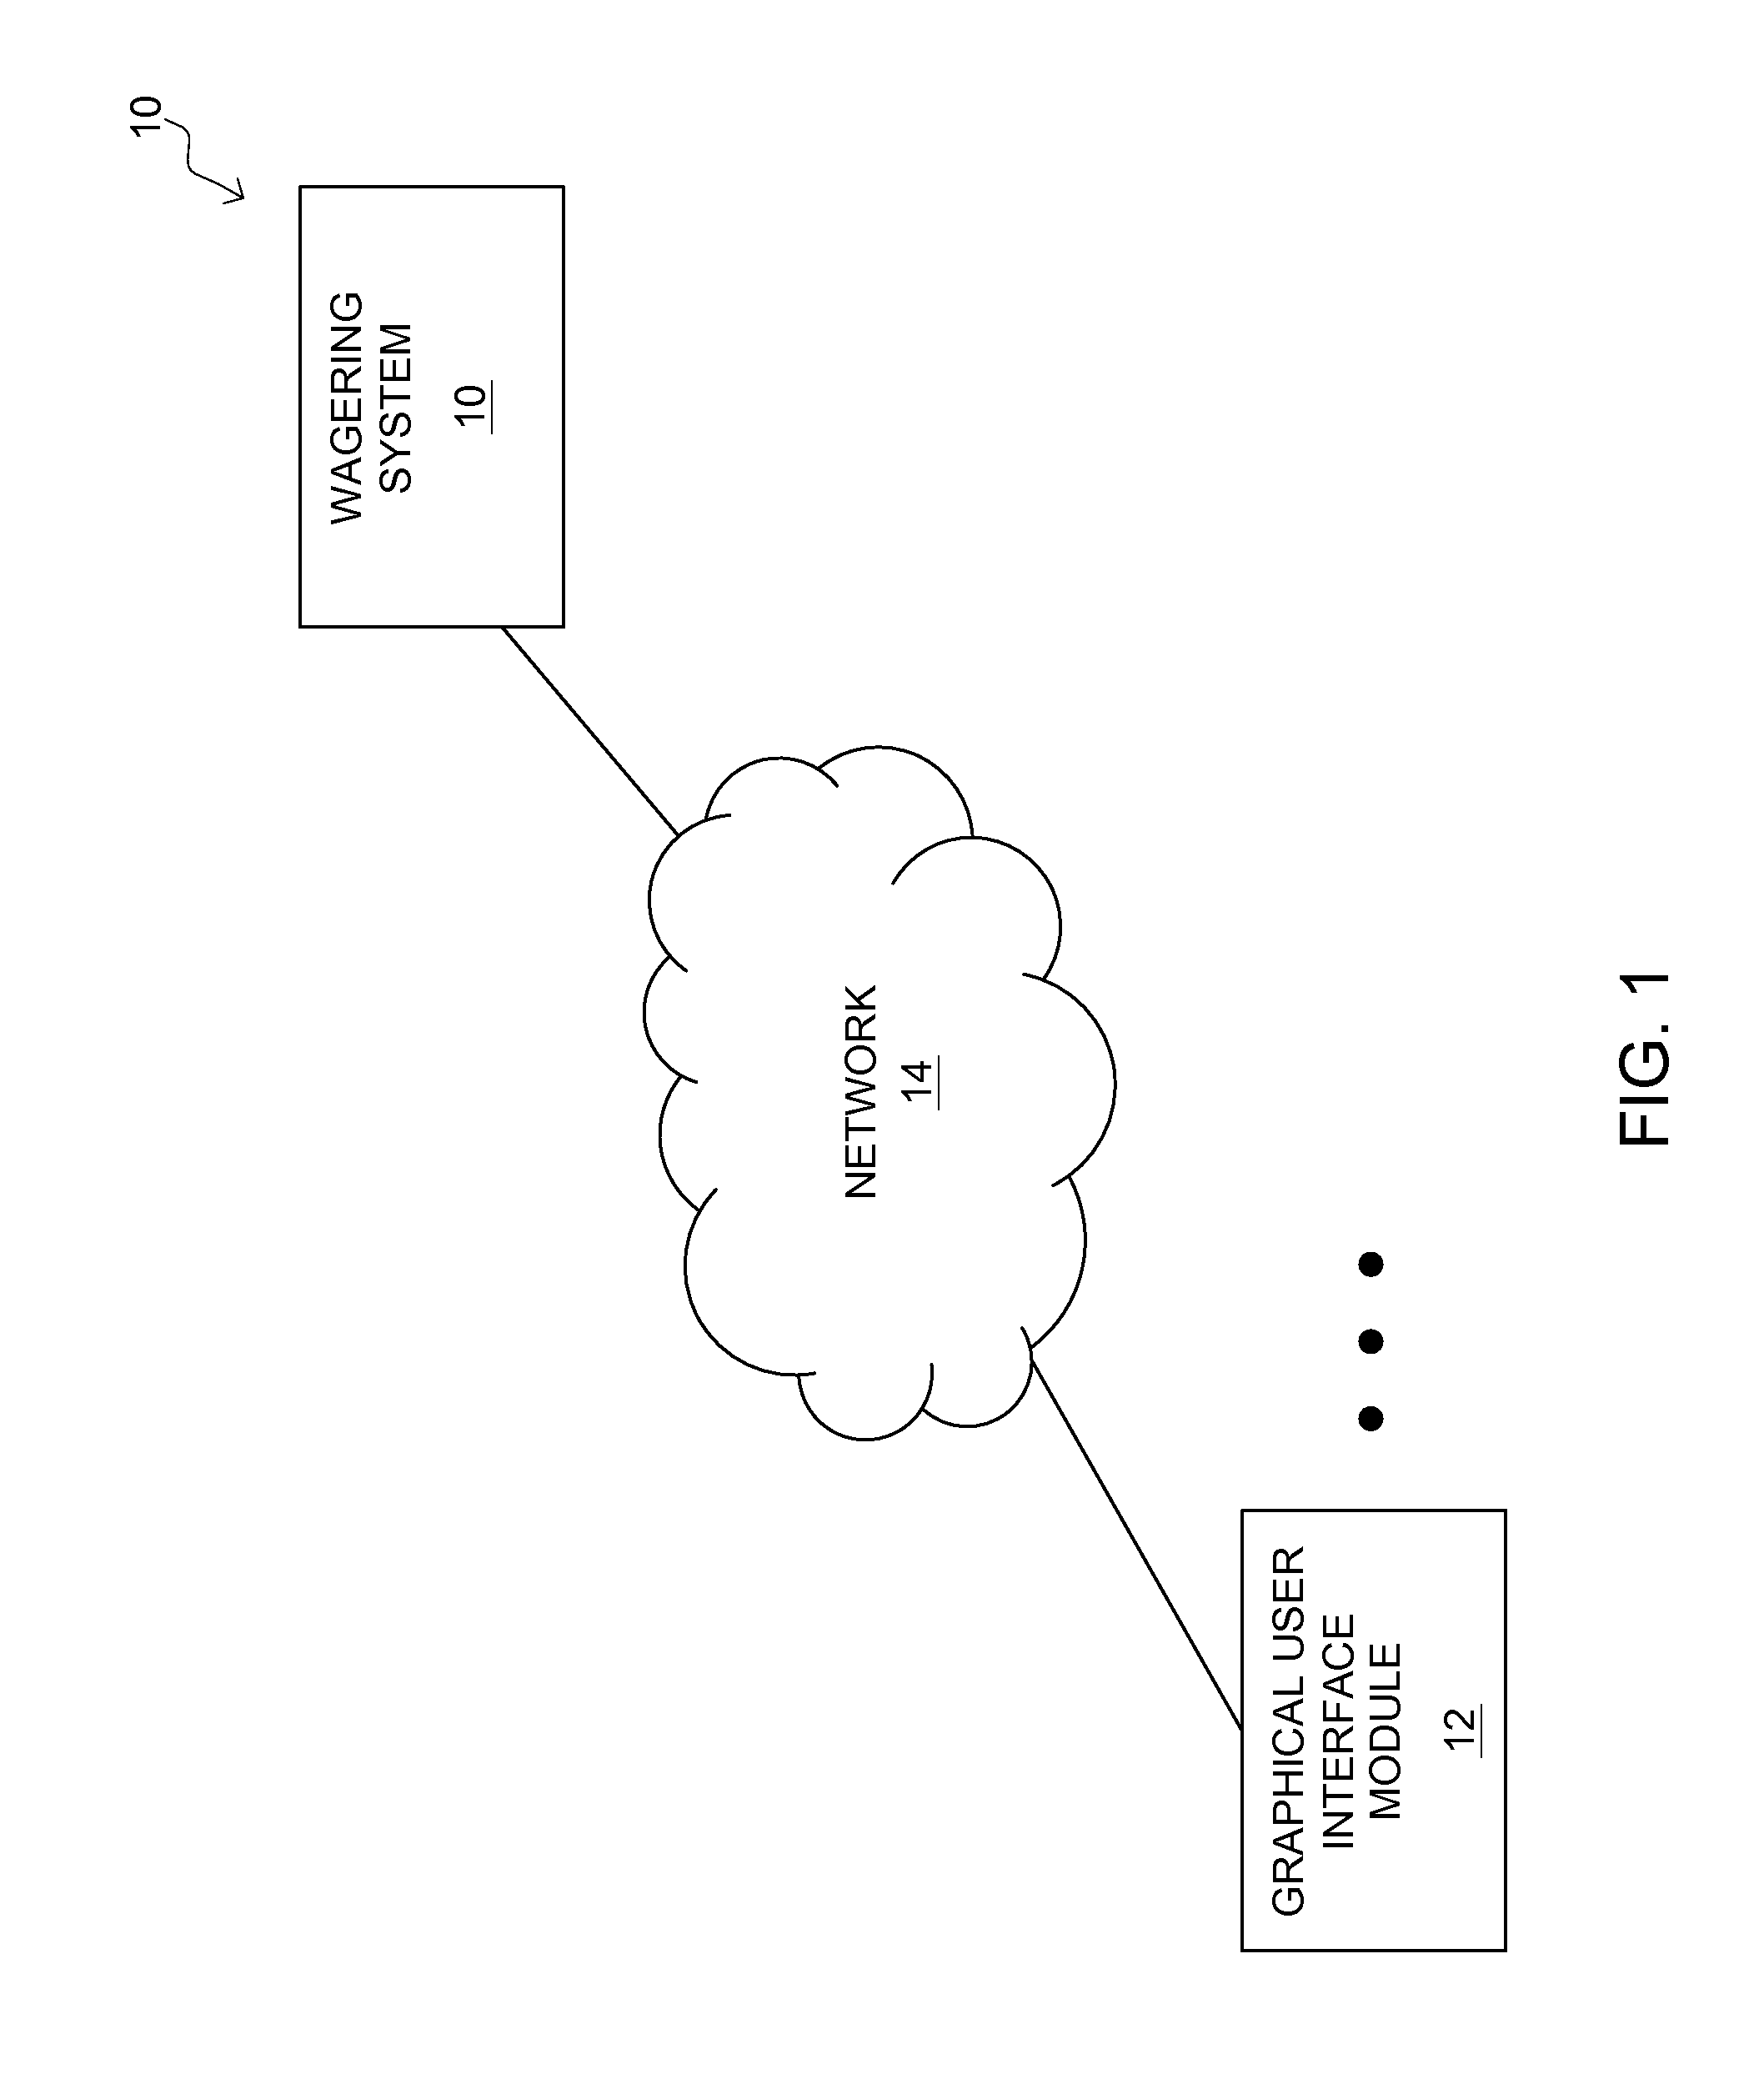 System and method of providing wagering over a computerized network